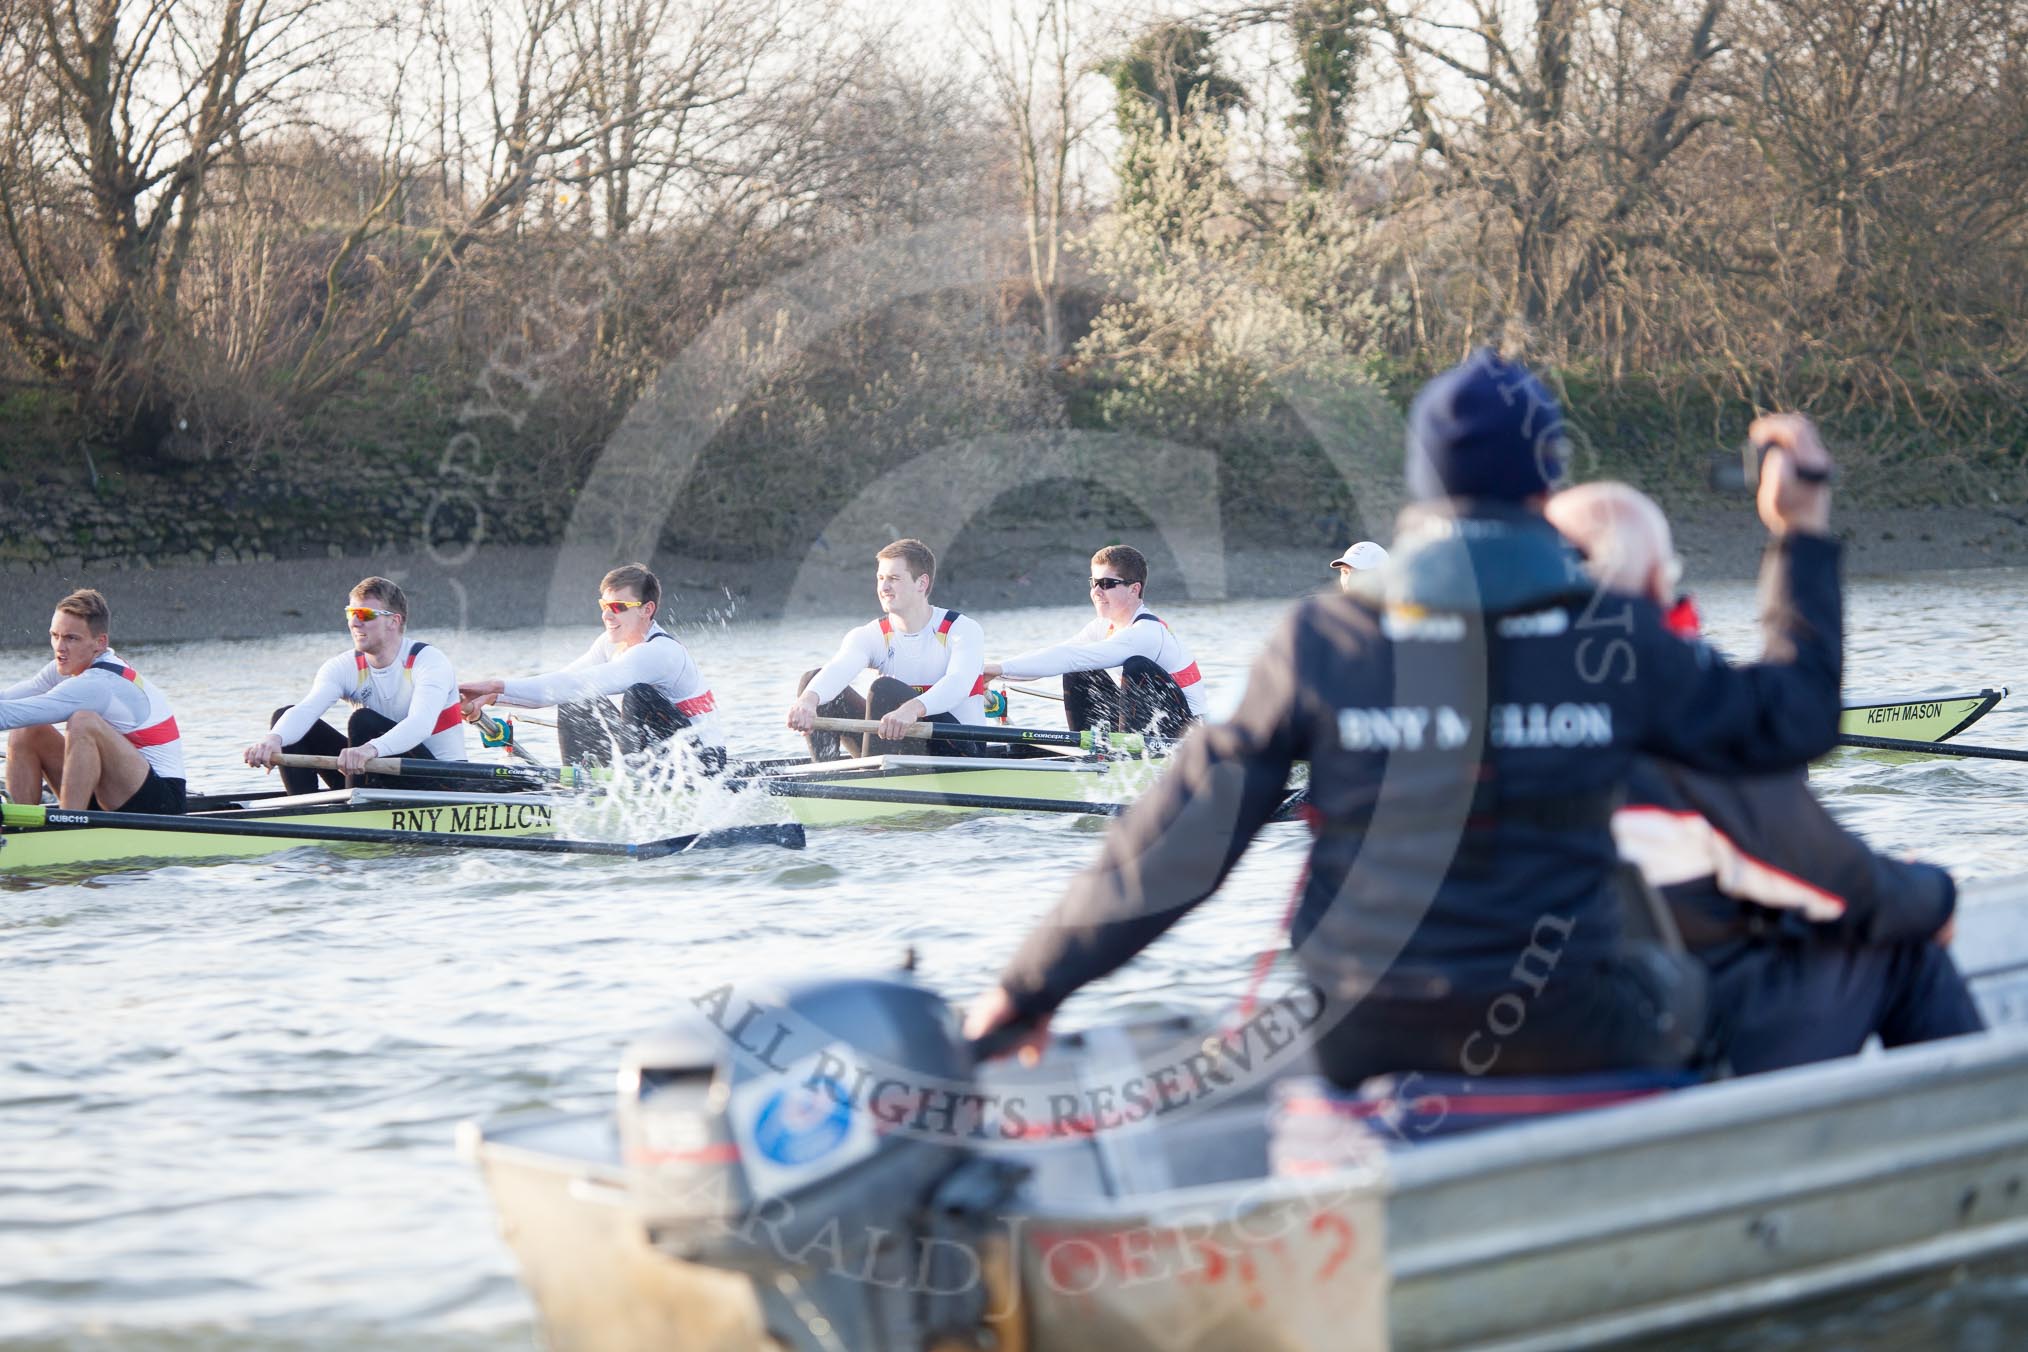 The Boat Race season 2014 - fixture OUBC vs German U23: The German U23-boat seen behind the tin boat with Oxford coach Sean Bowden..
River Thames between Putney Bridge and Chiswick Bridge,



on 08 March 2014 at 16:50, image #98